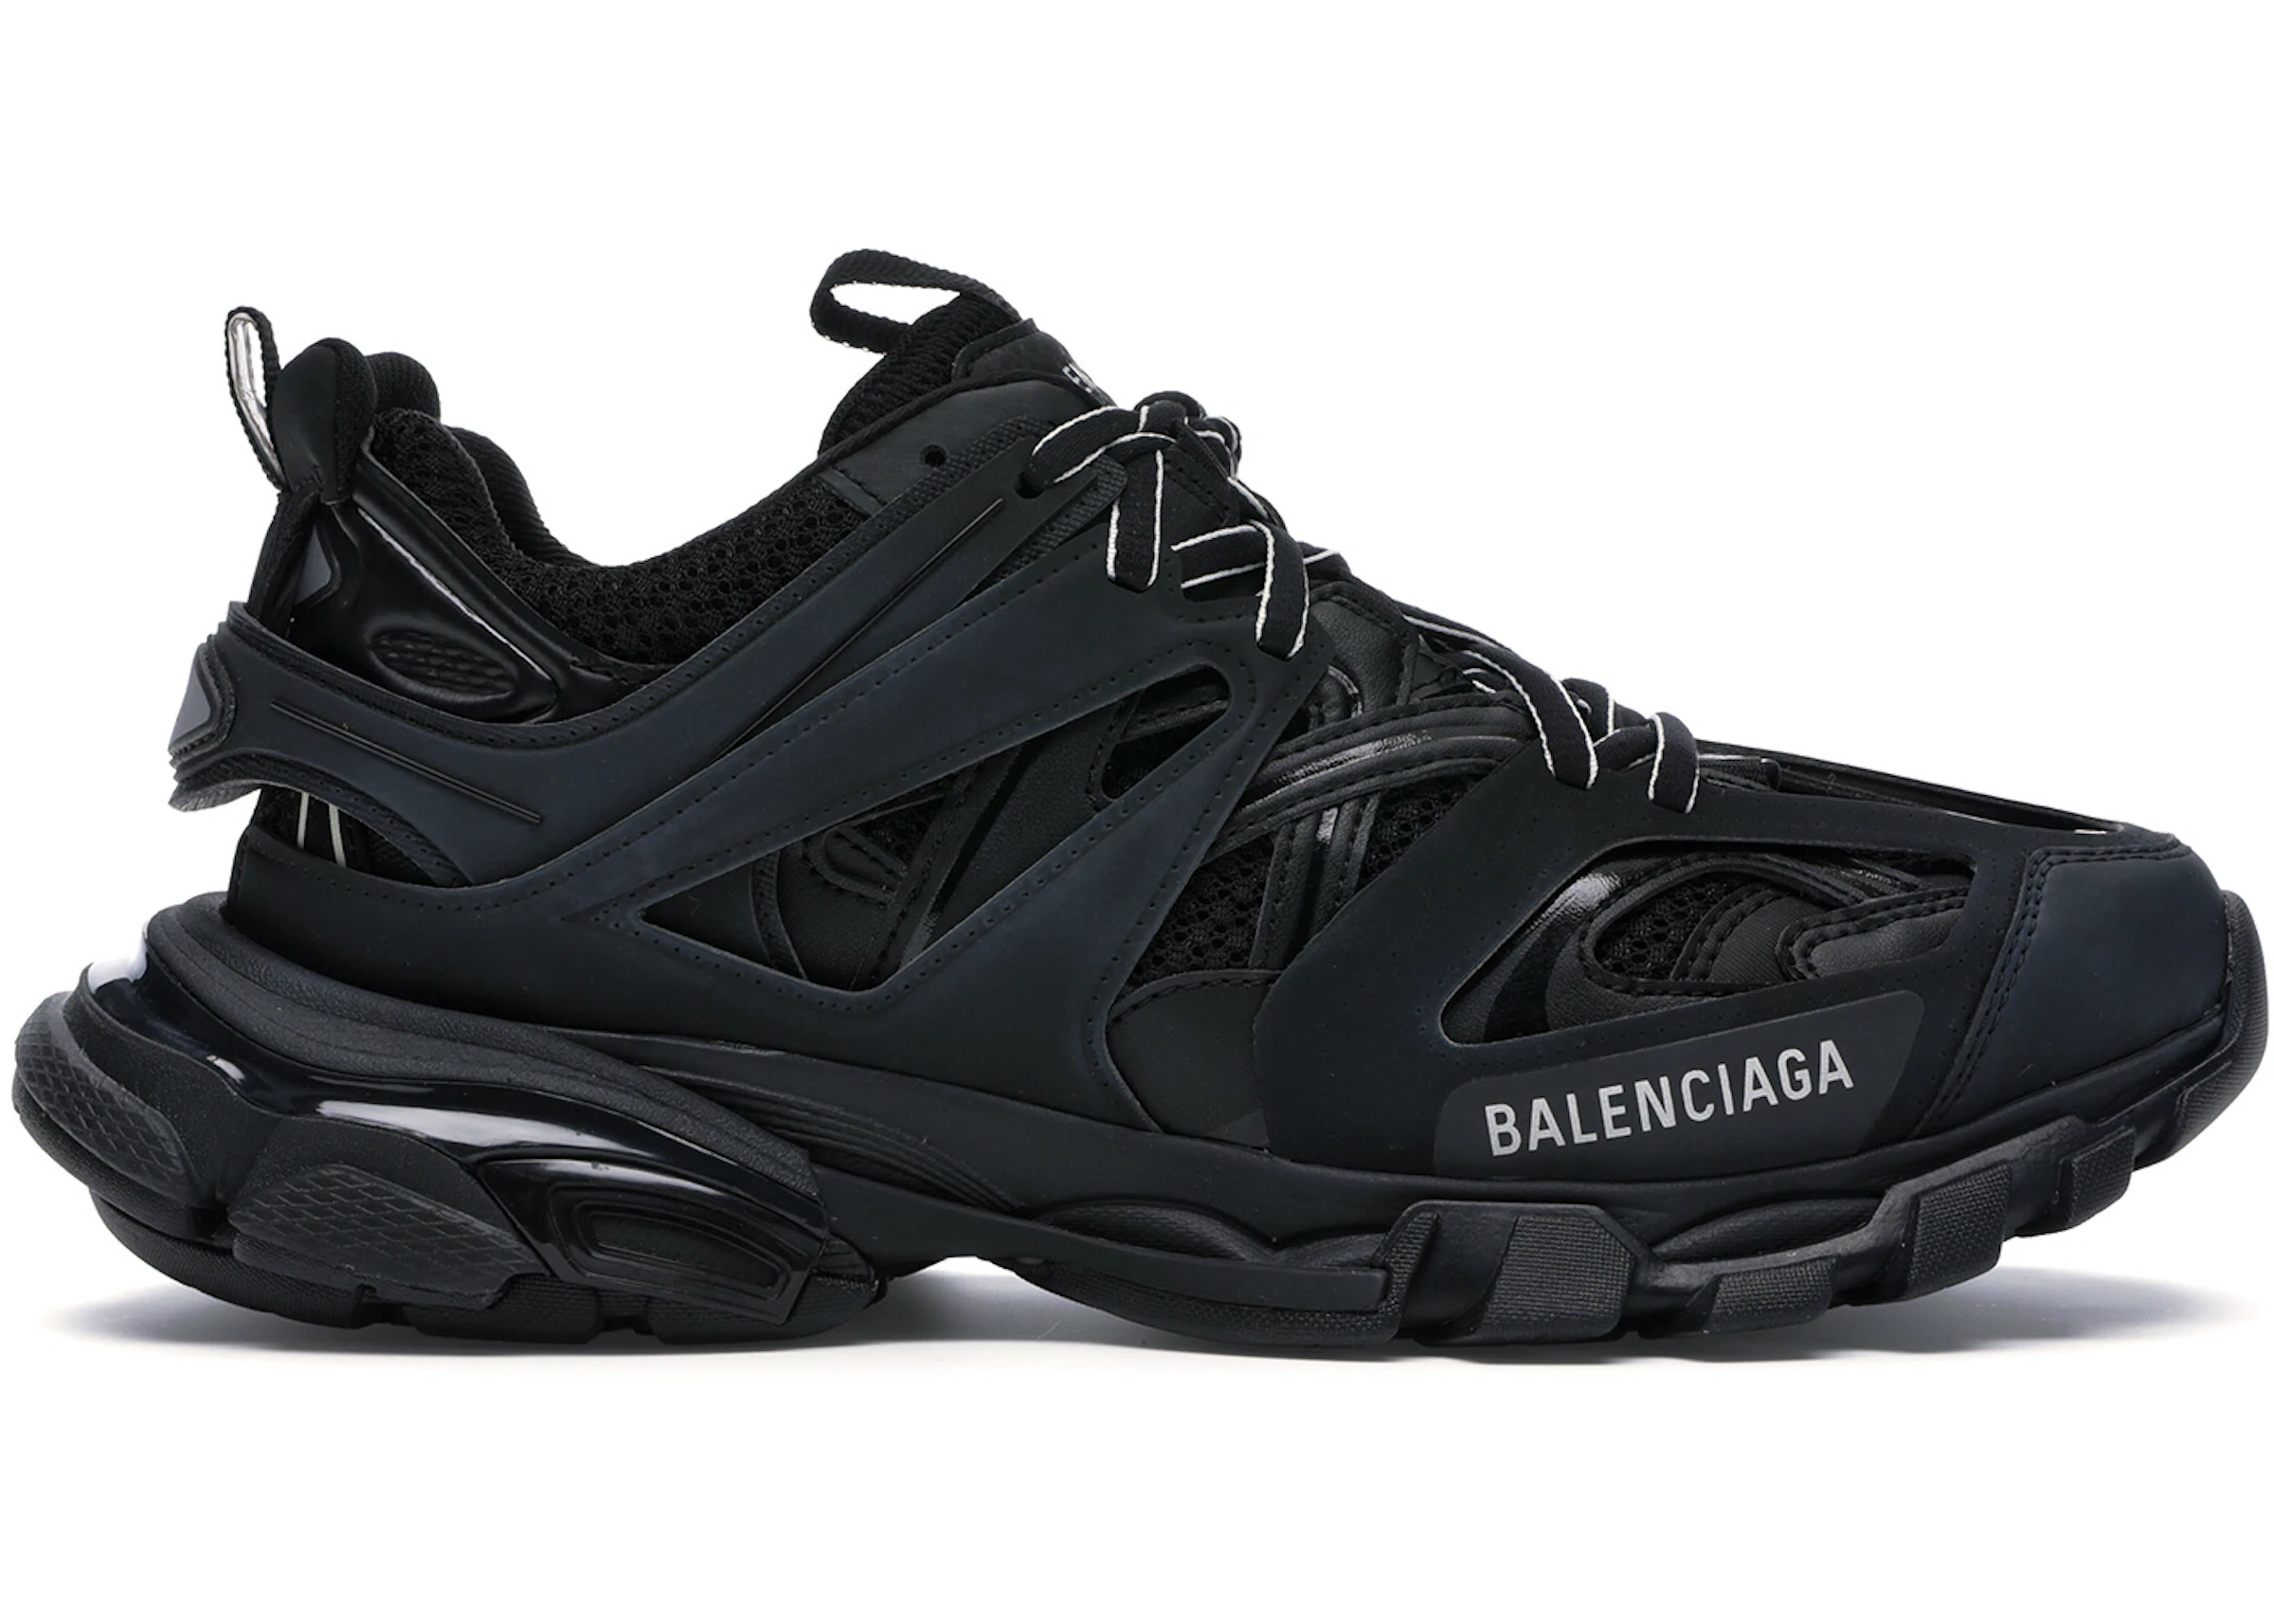 Fade out fade Retire Buy Balenciaga Shoes and Sneakers - StockX